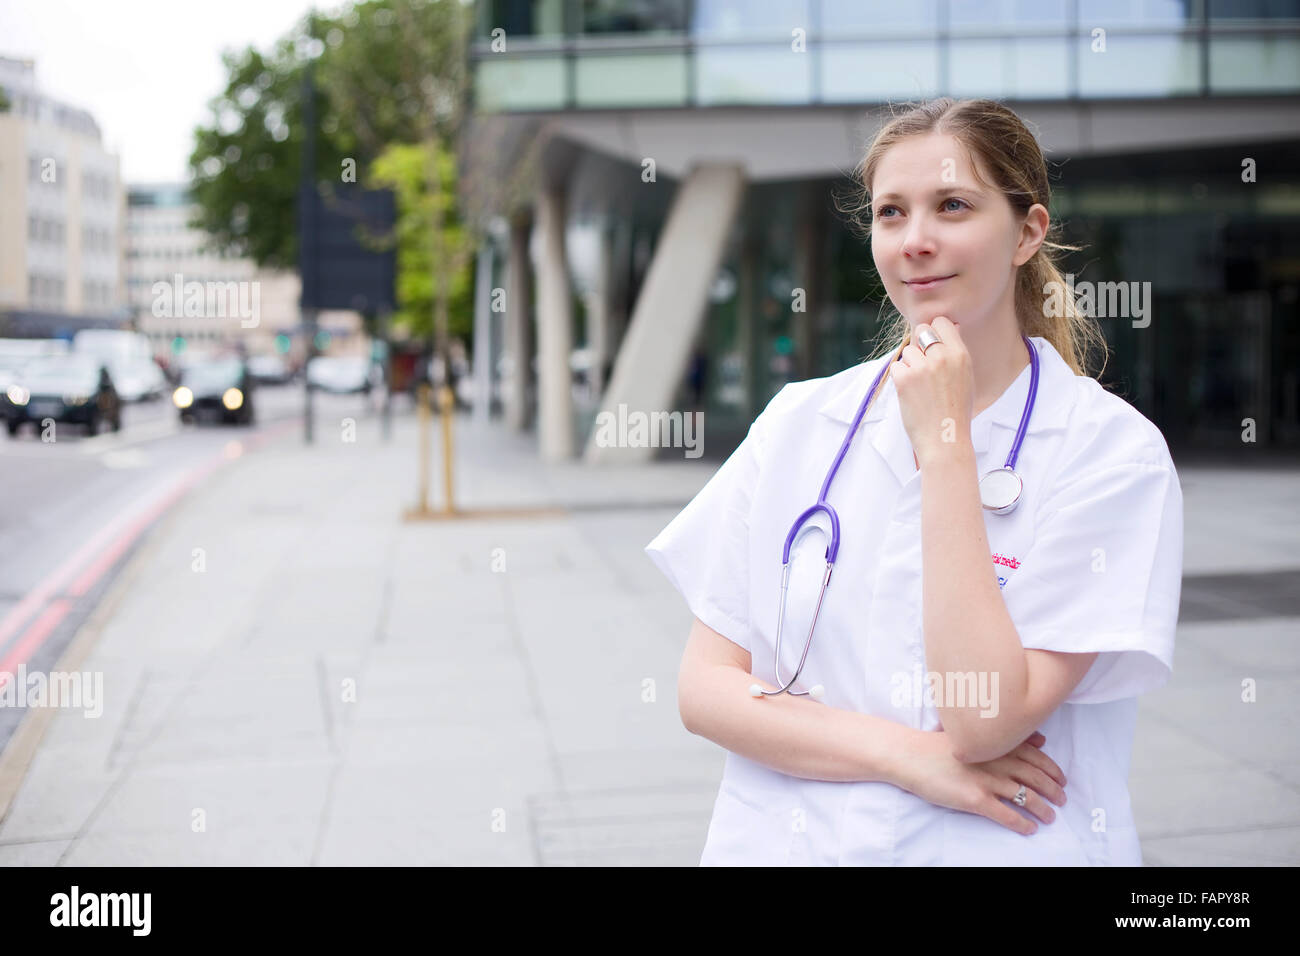 young doctor looking thoughtful Stock Photo